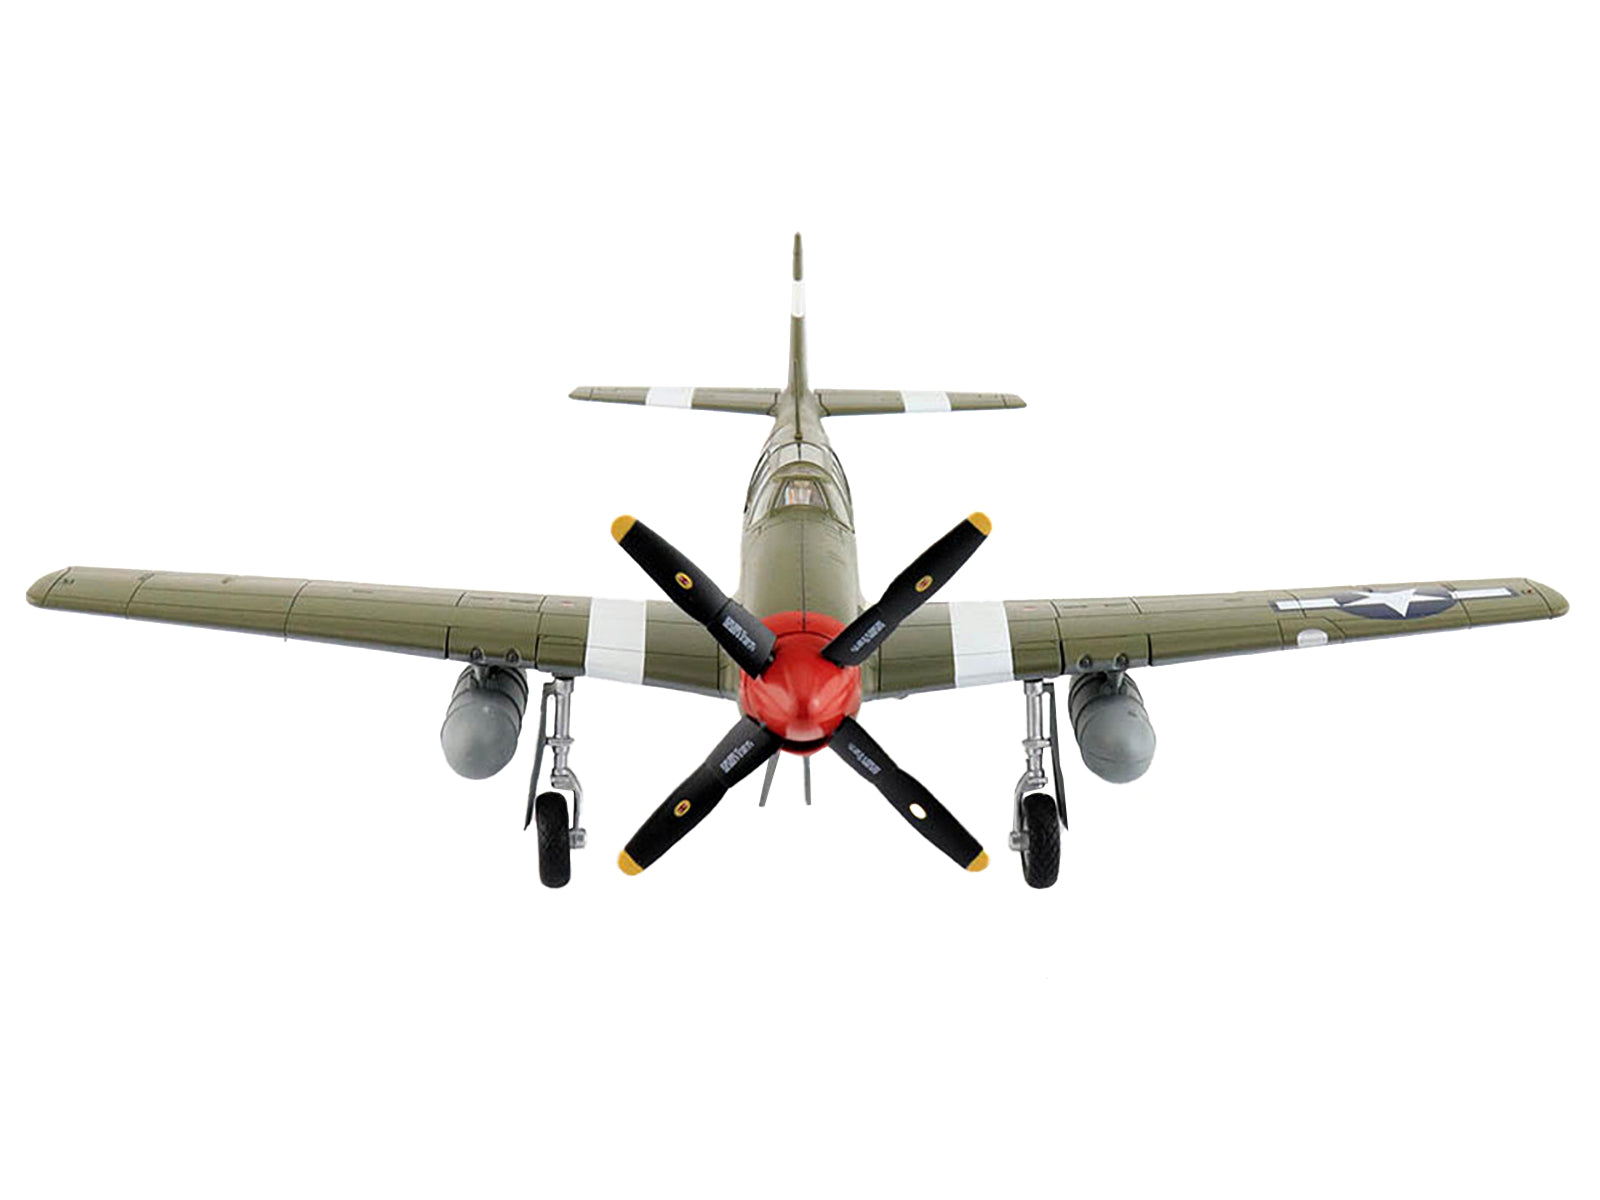 North American P-51B Mustang Fighter Aircraft "Steve Pisanos 4th FG 334th FS" (1944) "Air Power Series" 1/48 Diecast Model by Hobby Master